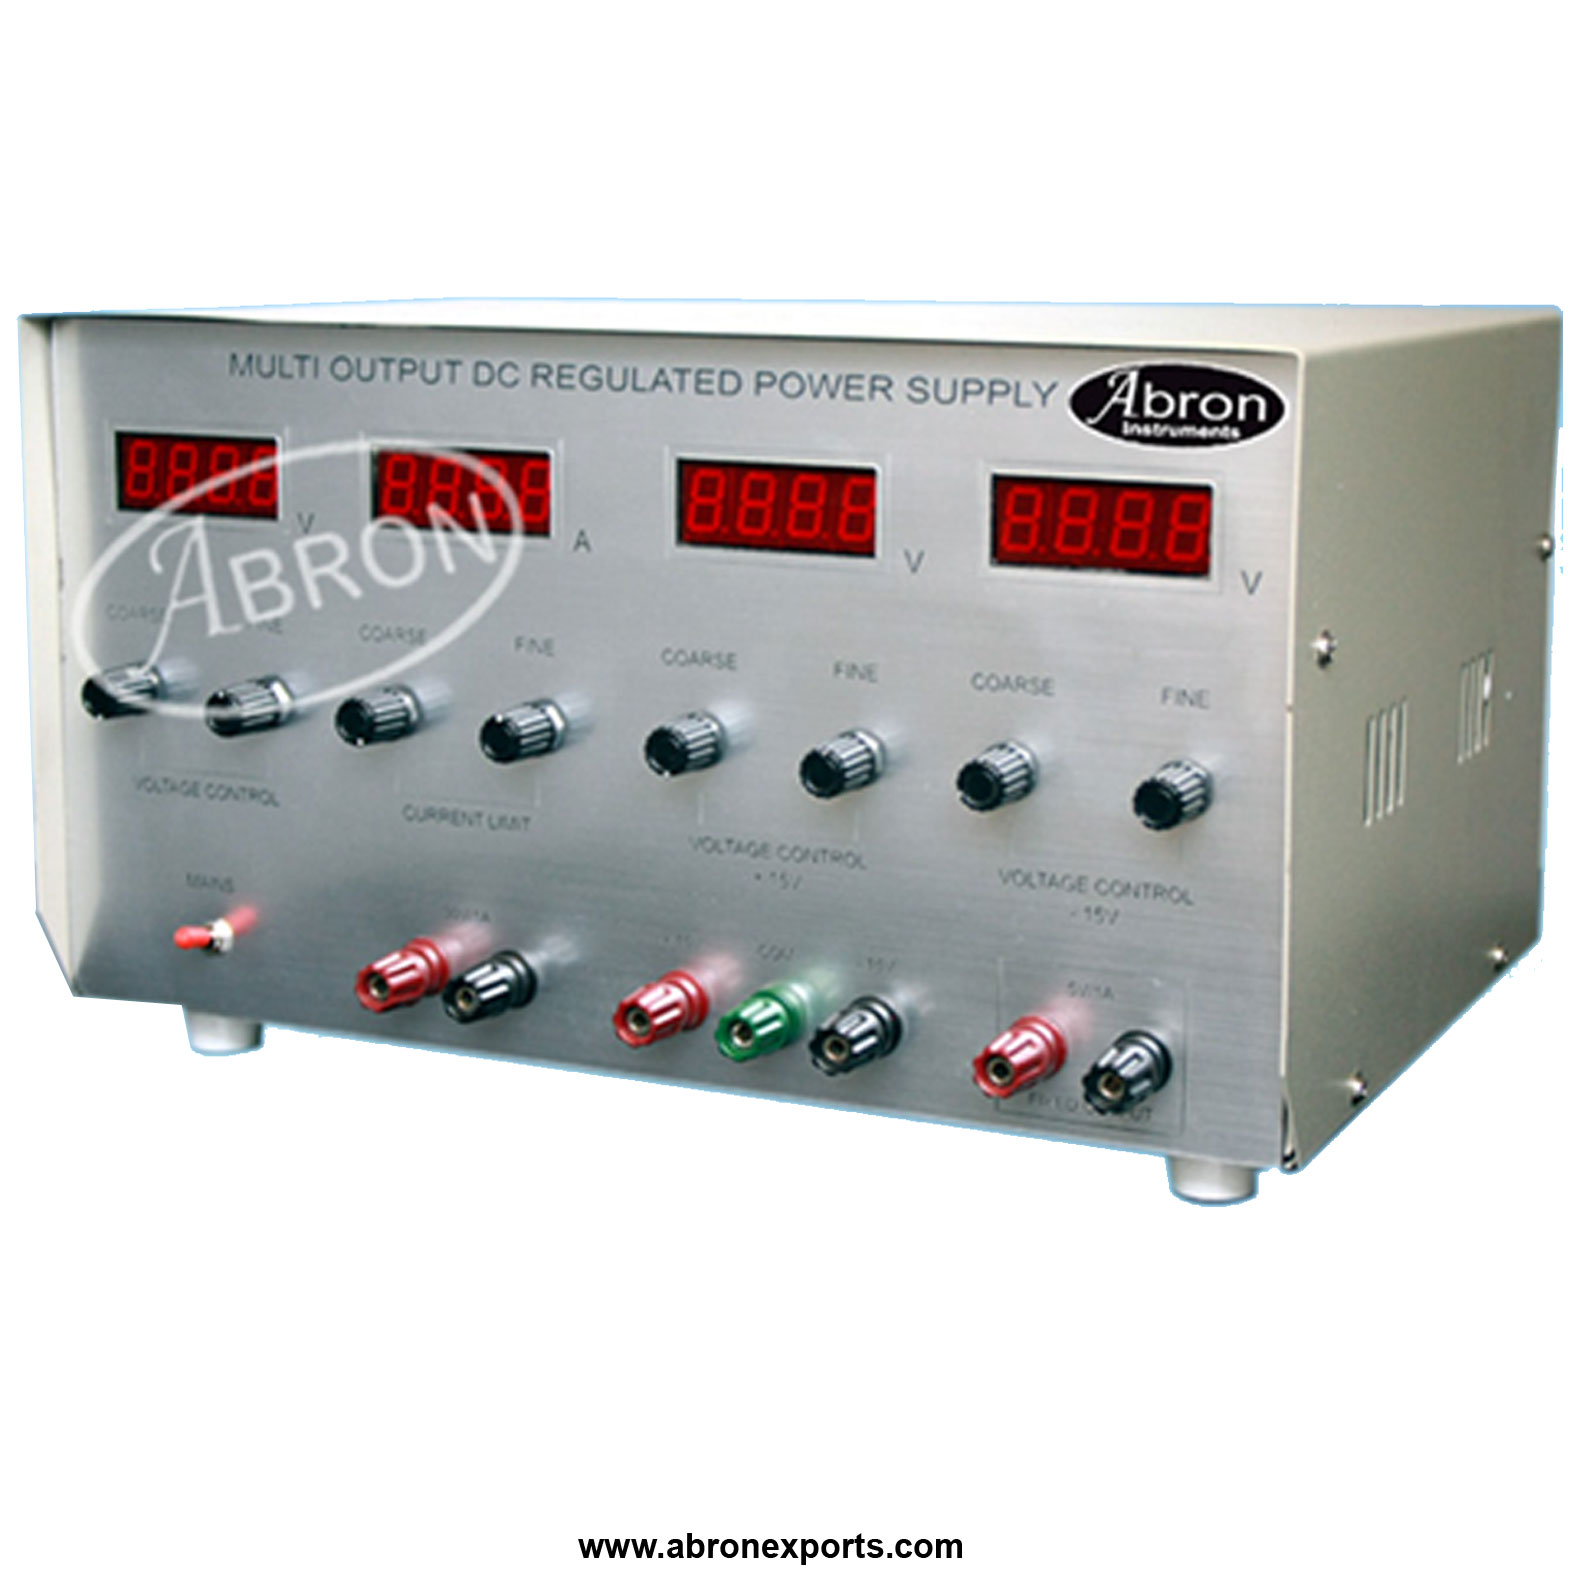 Power supply Digital Dual 0-30VDC 2 Amp 0-30V DC 2Amp with separate controls and display 2+2 Meters Digital AE-1377DD302  